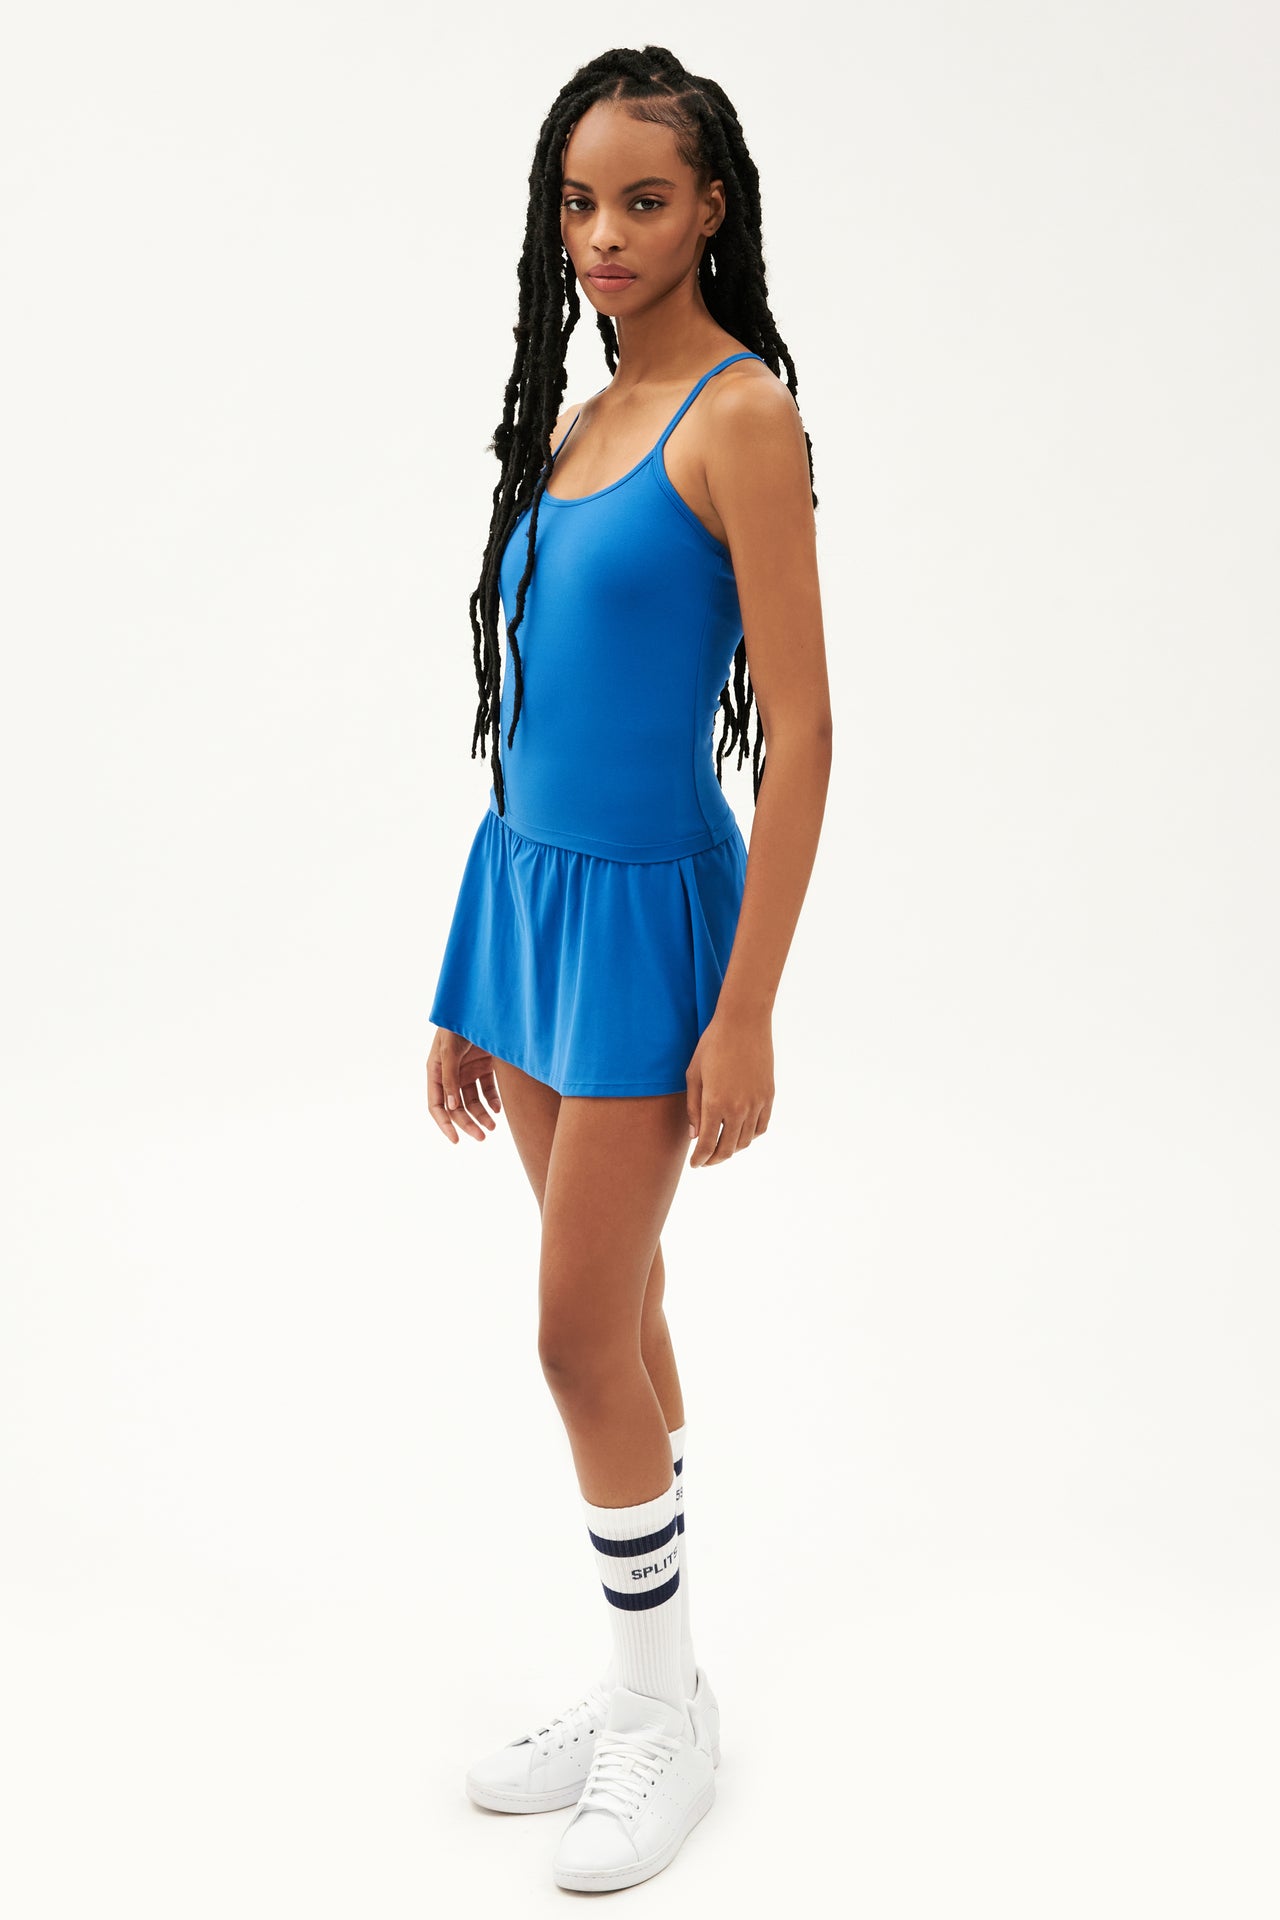 Full side view of girl wearing blue upper thigh skirt with built in shorts, blue tank top and white shoes